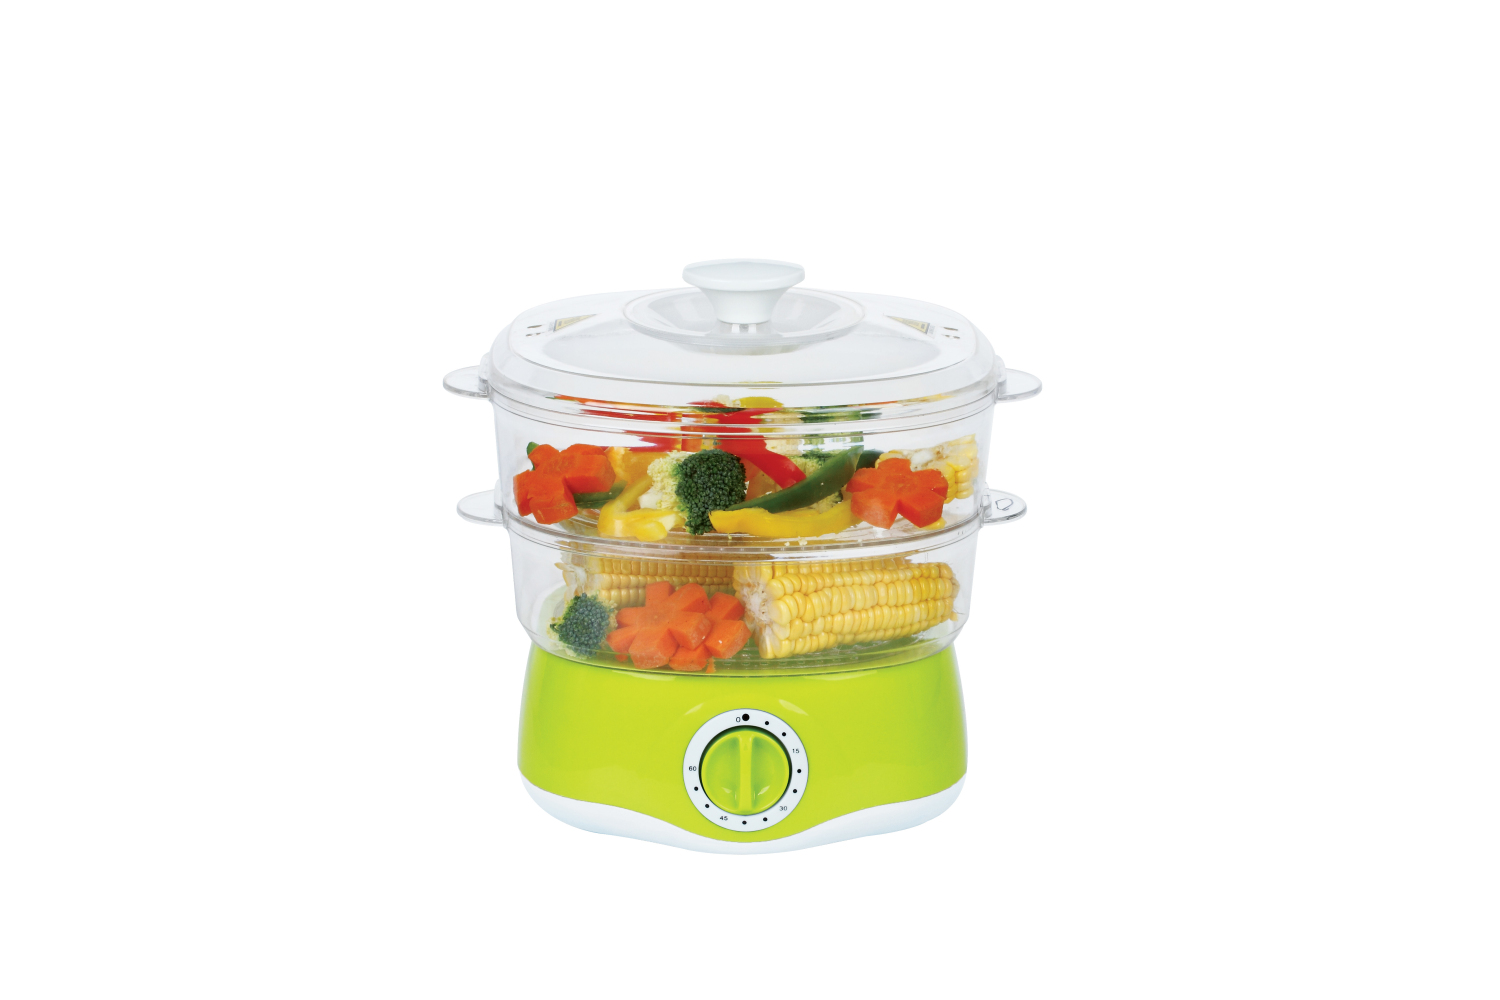 Practical MINI 4L Steamer with food grade material, steam your Cuisine for Mouthwatering Meals!